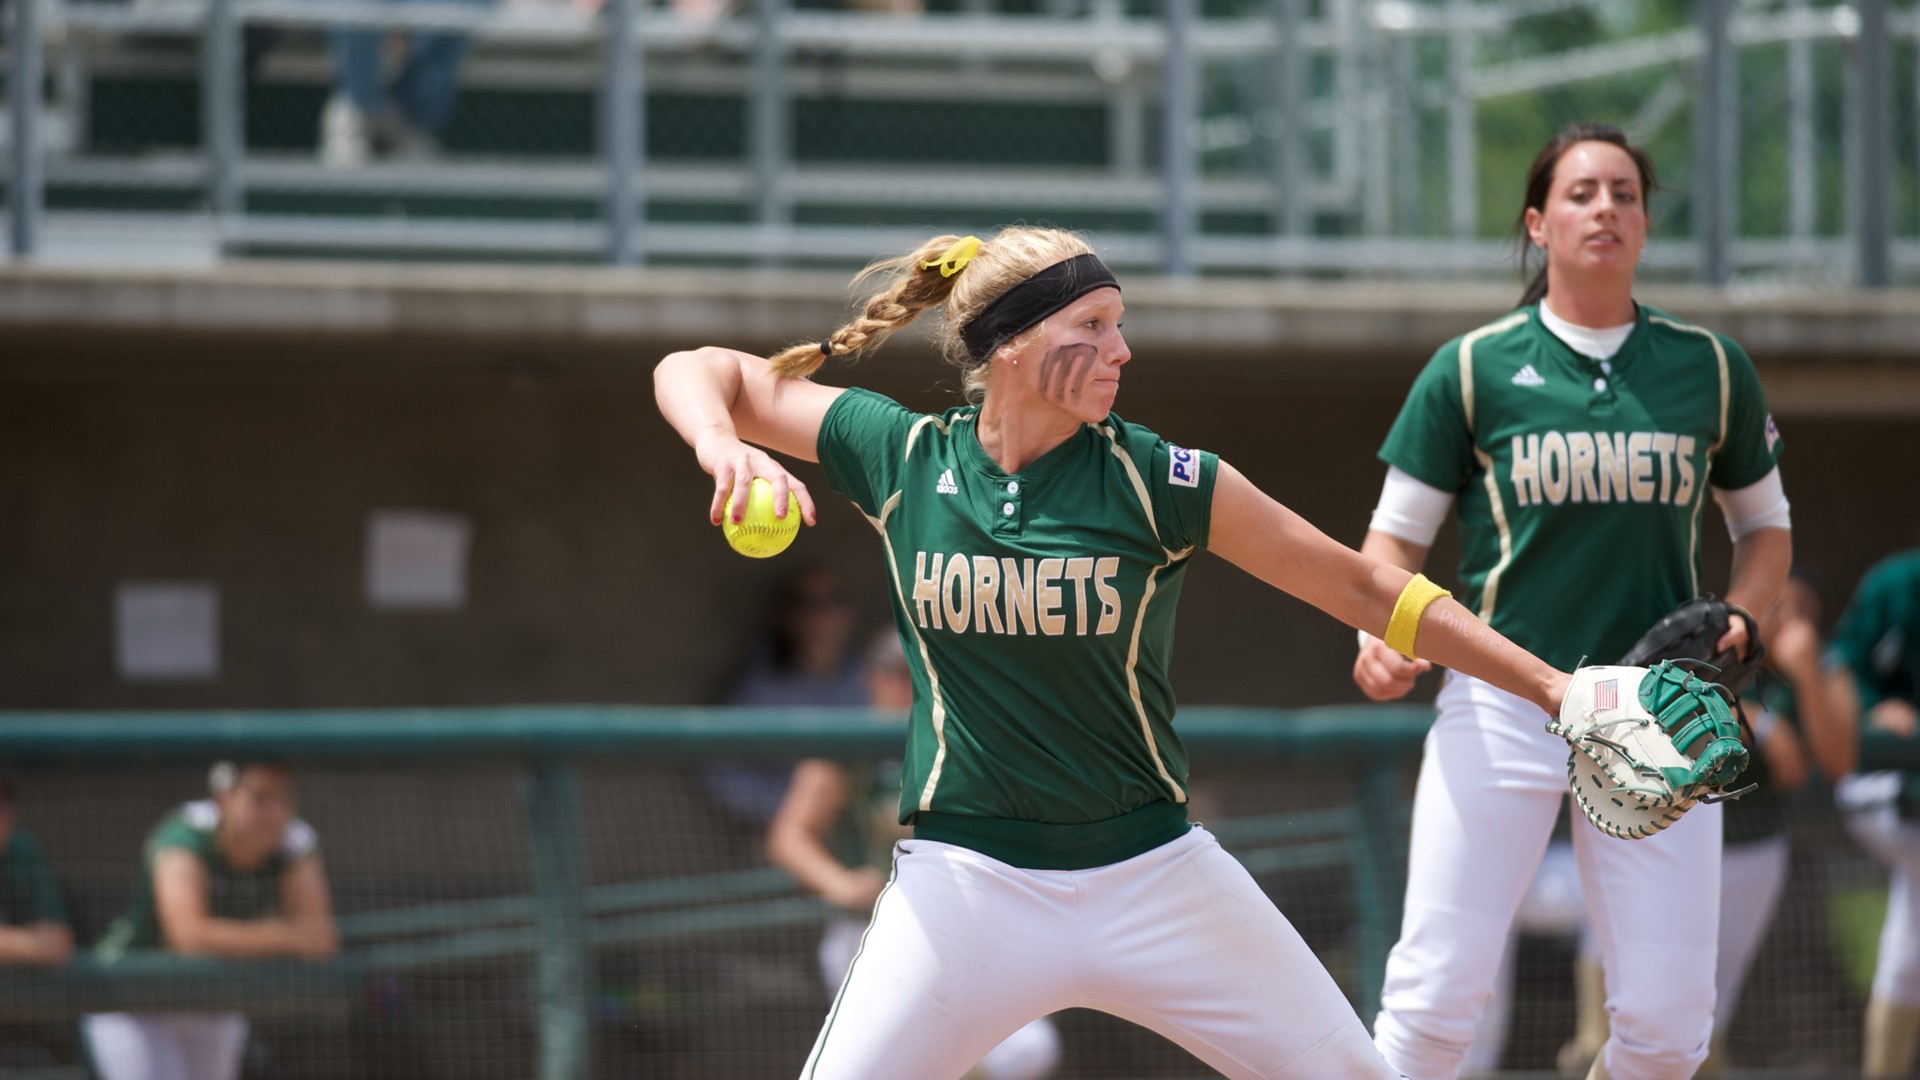 Nakken was a star at Sac State, ending her career in the top 10 in several categories, including putouts, home runs, fielding percentage and runs scored.